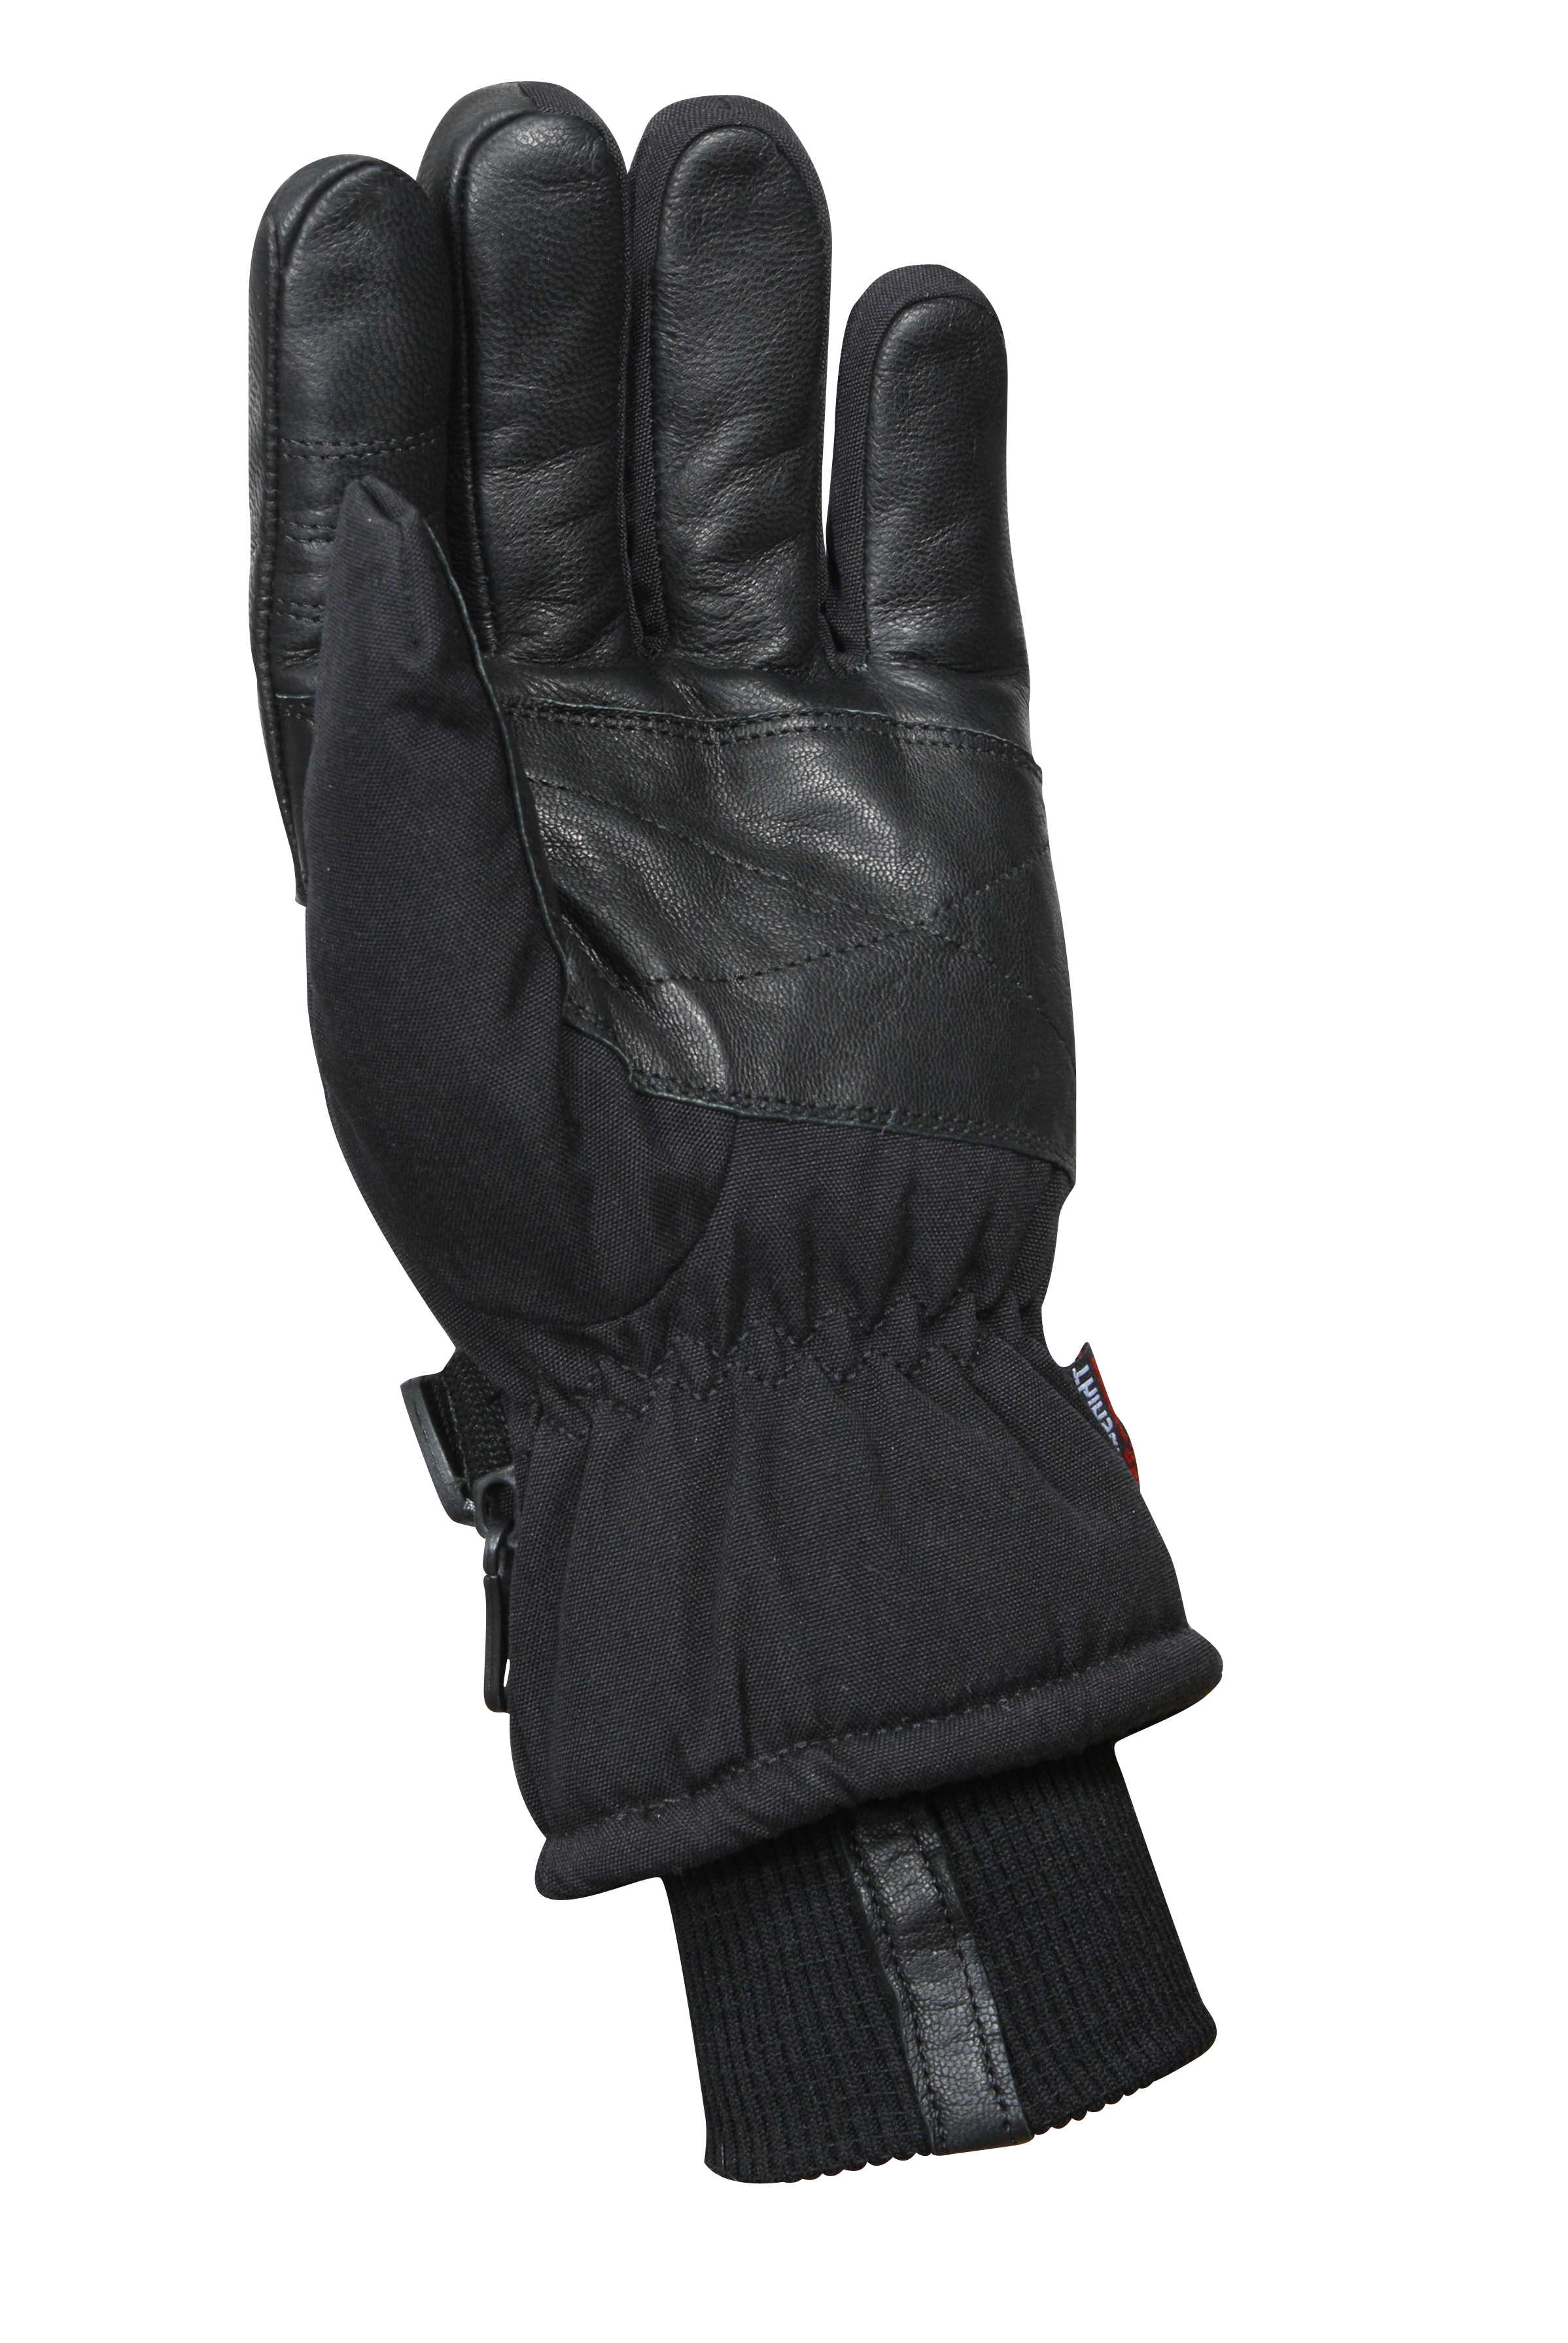 Rothco 3559 Cold Weather Military Gloves Black 